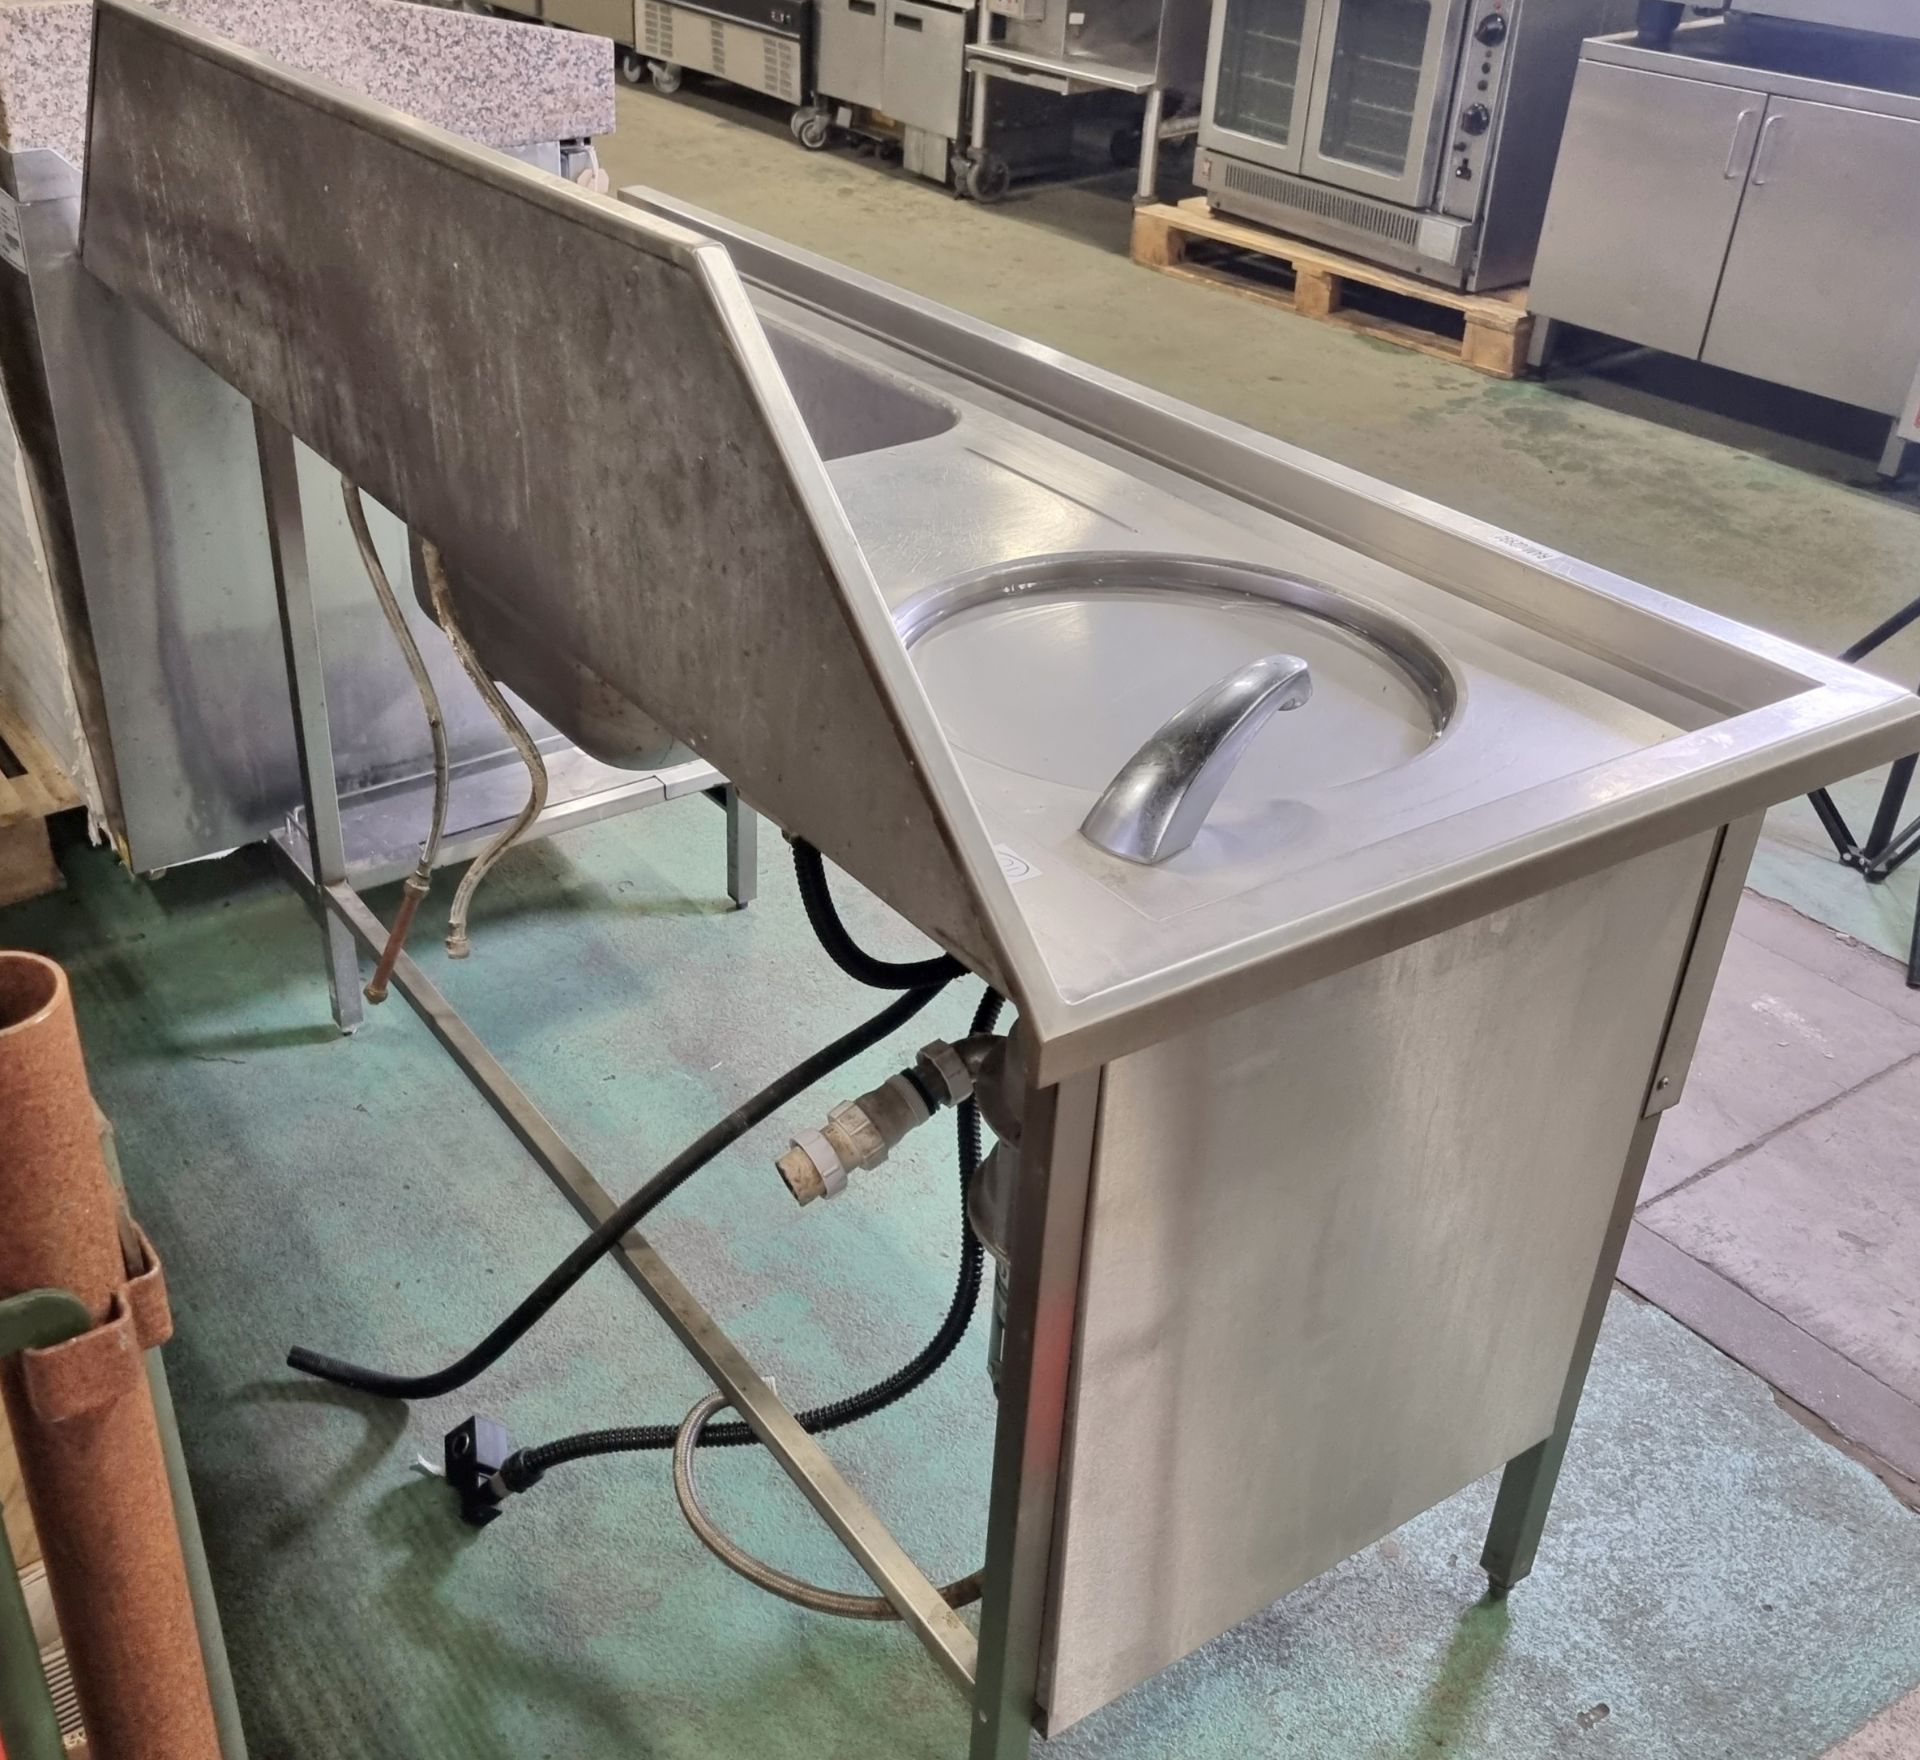 Stainless steel sink unit with waste disposal (currently sealed) - 165 x 70 x 120cm - Bild 9 aus 9